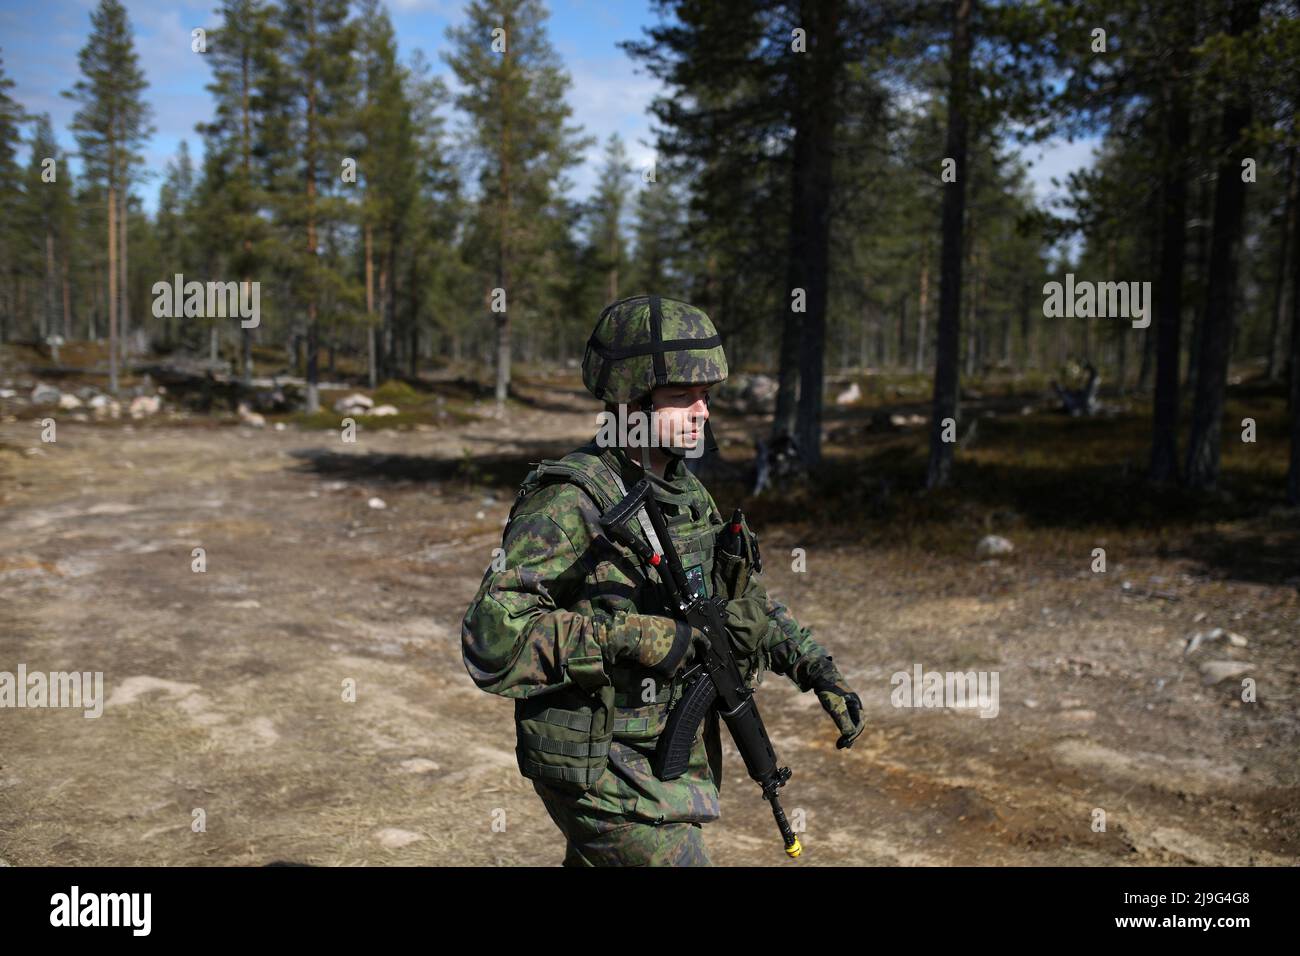 A Finnish soldier participates in Lightning Strike 22 exercise, in  Rovajarvi, Finland, May 23, 2022. REUTERS/Stoyan Nenov Stock Photo - Alamy